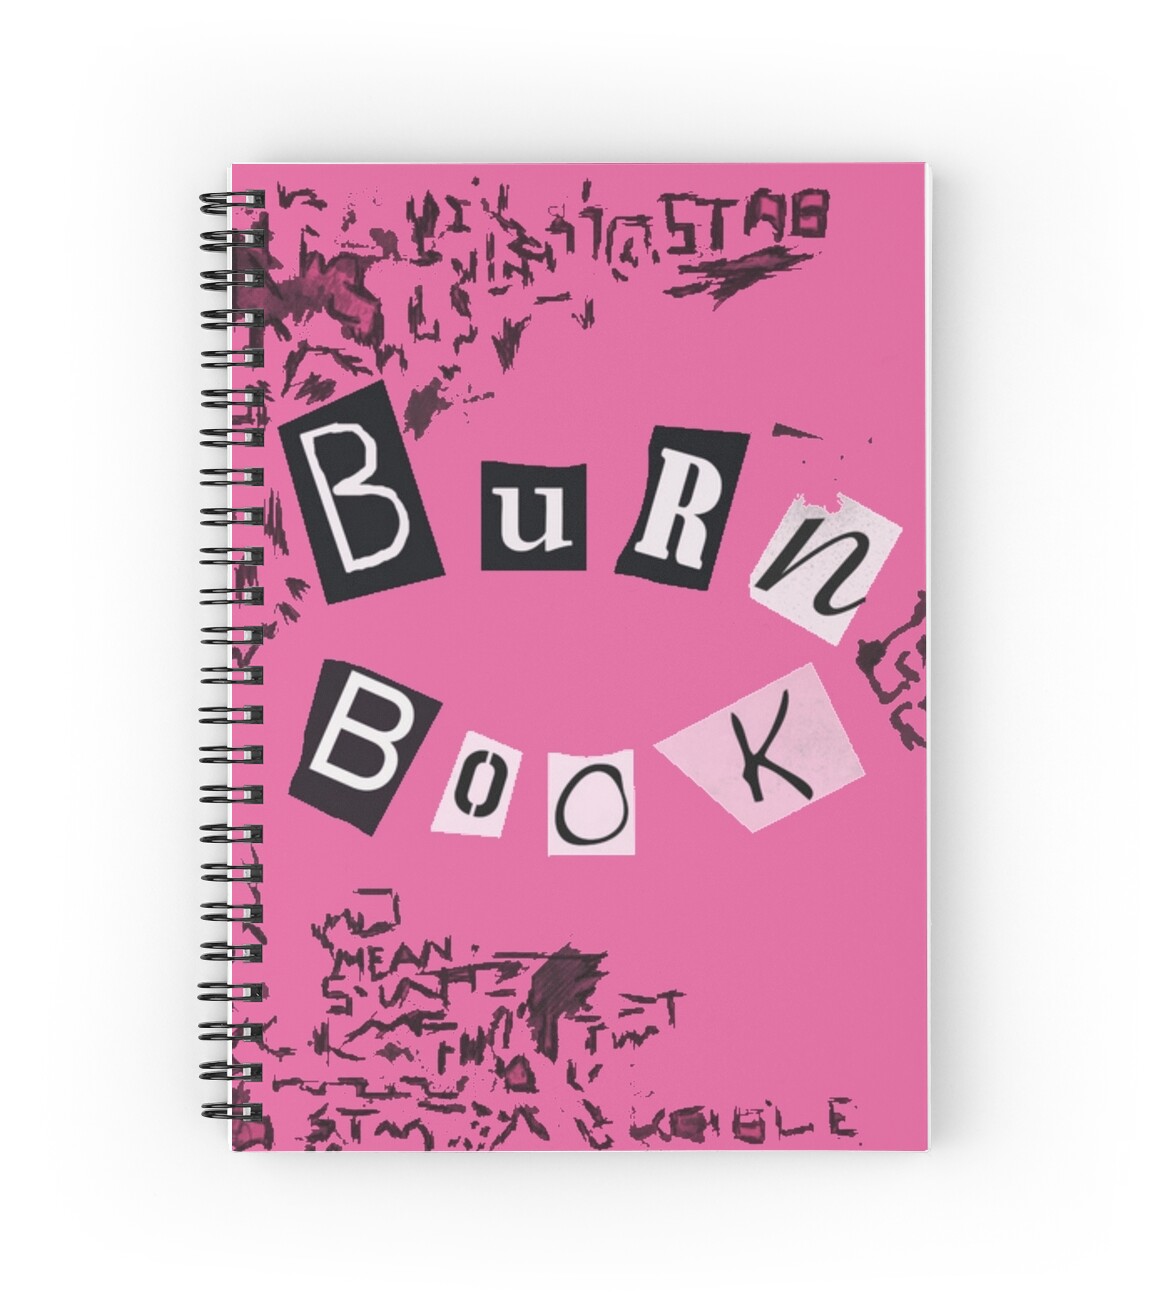 Mean Girls Burn Book Spiral Notebooks By Fakebadger Redbubble